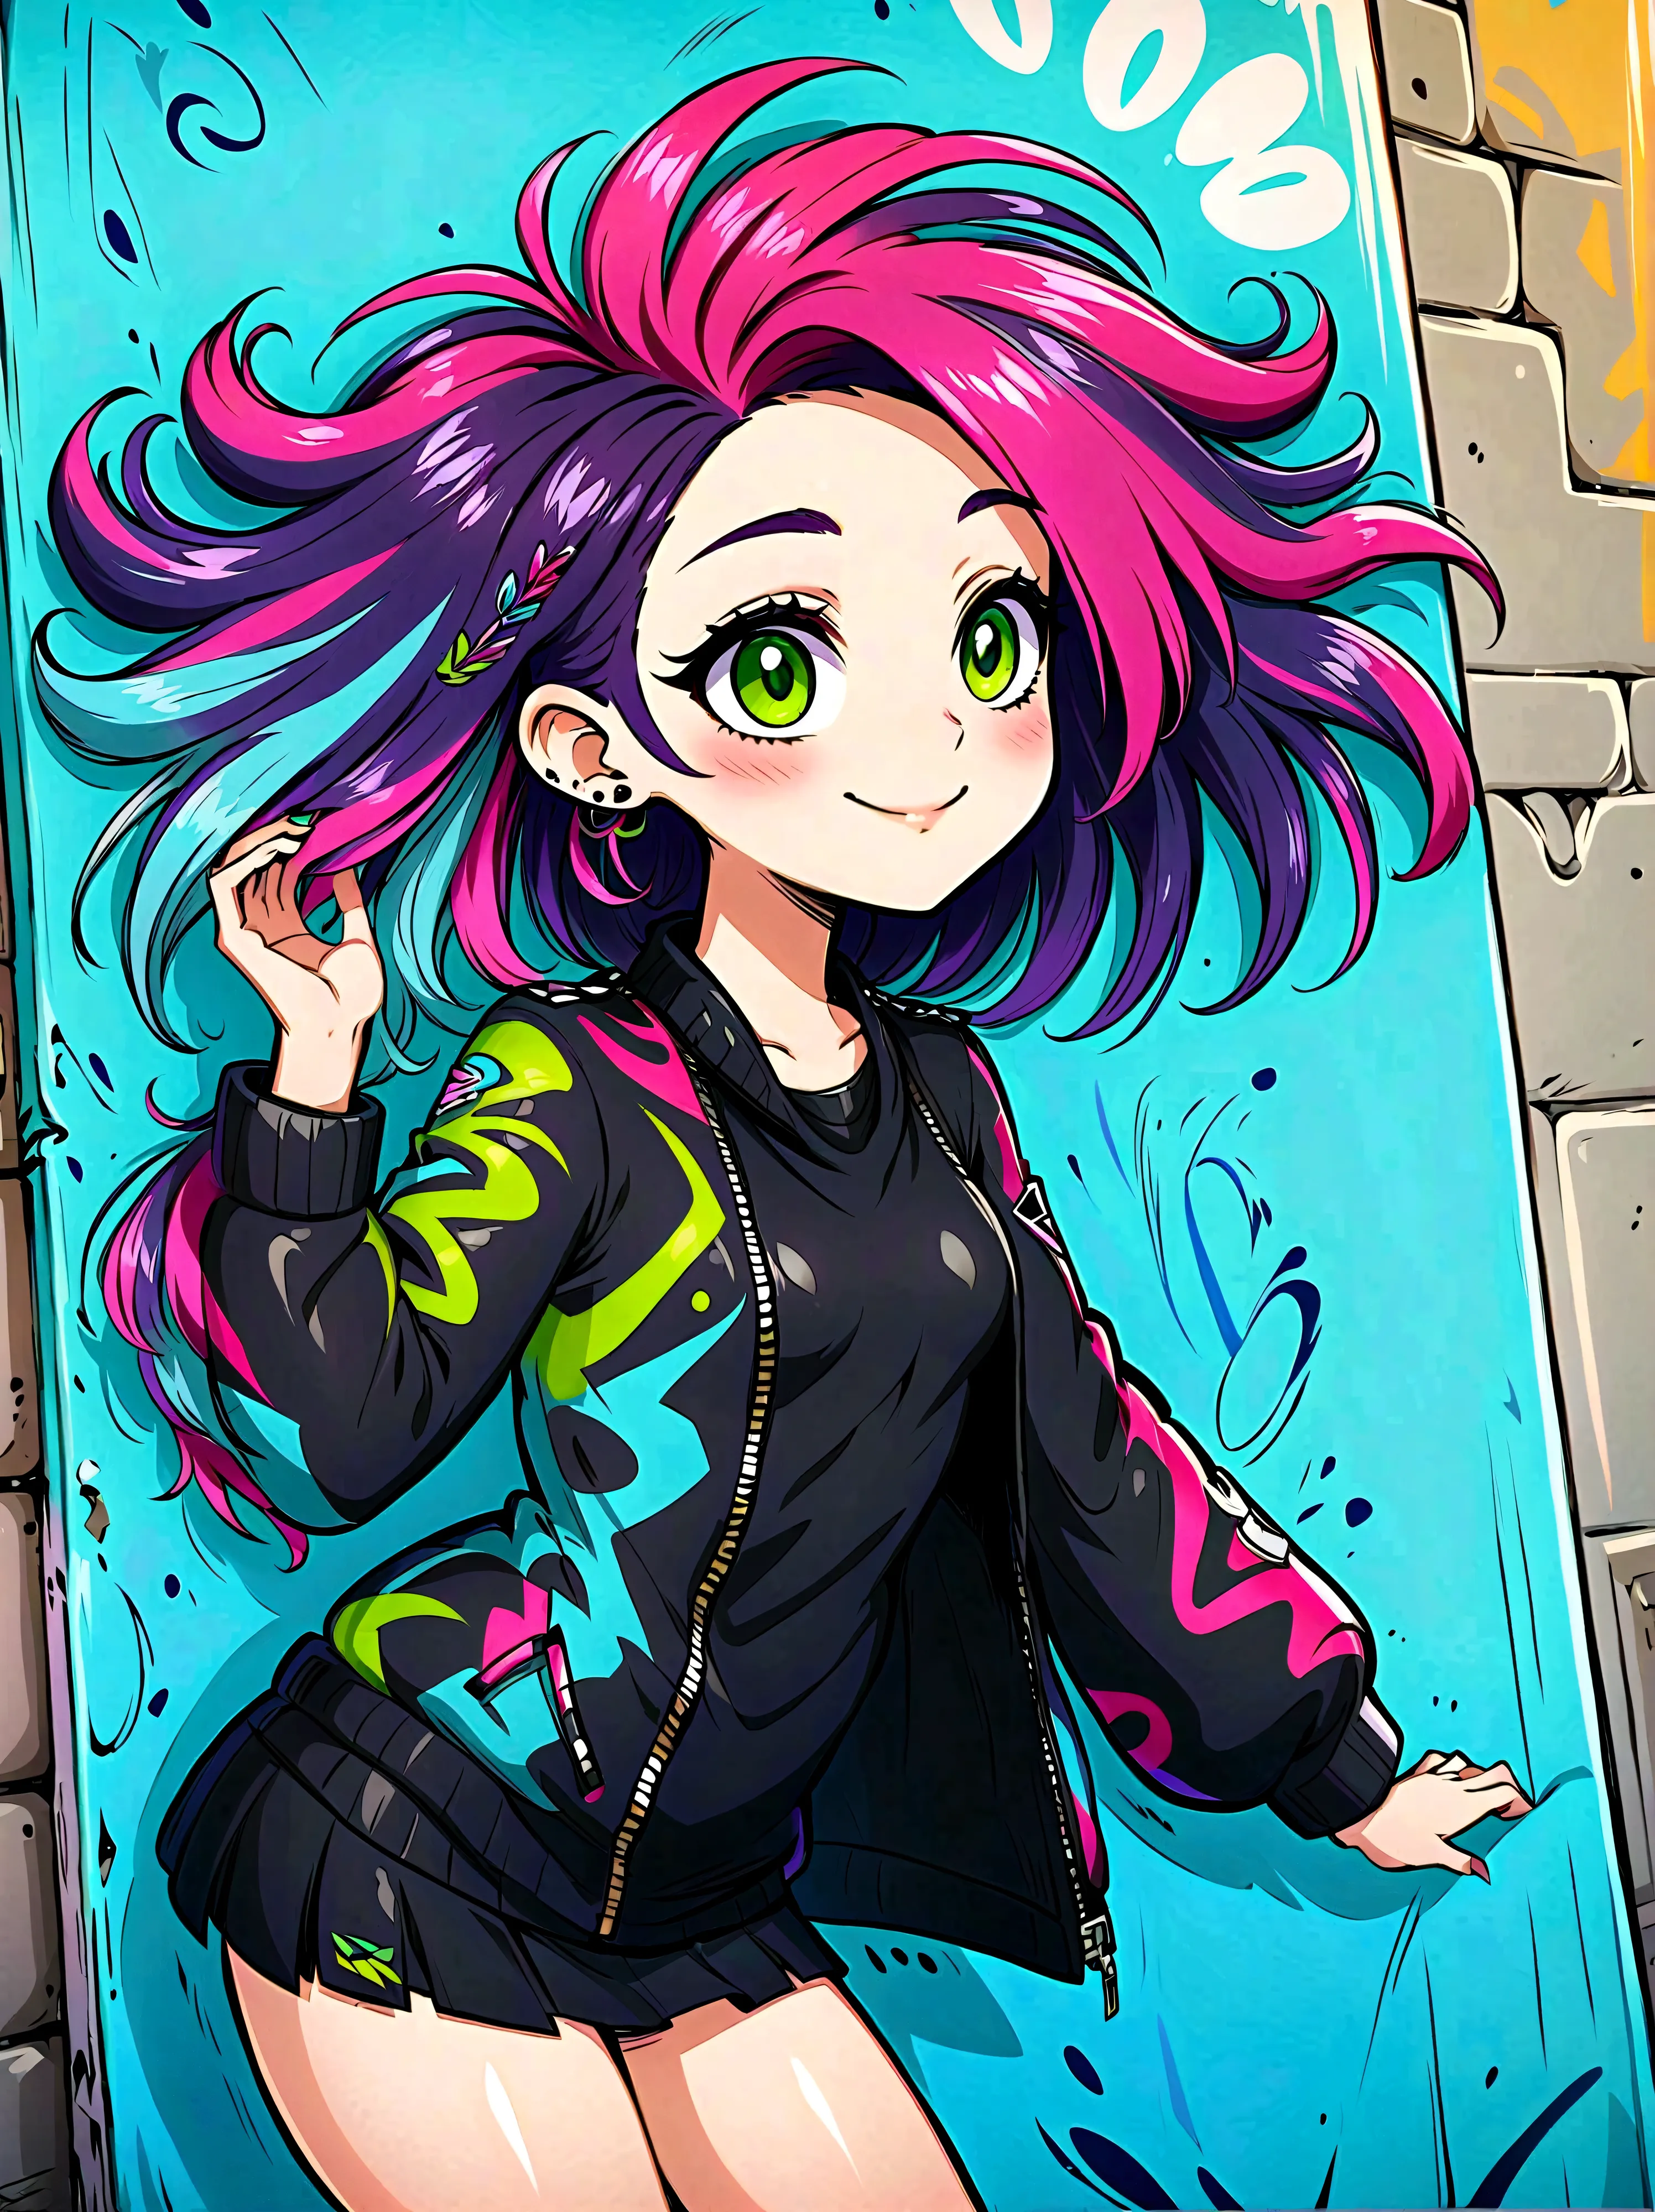 Graffiti style，Cartoon Characters，Vector illustration，side，Large and expressive eyes，Friendly Smile，Gorgeous clothes，Colorful ha...